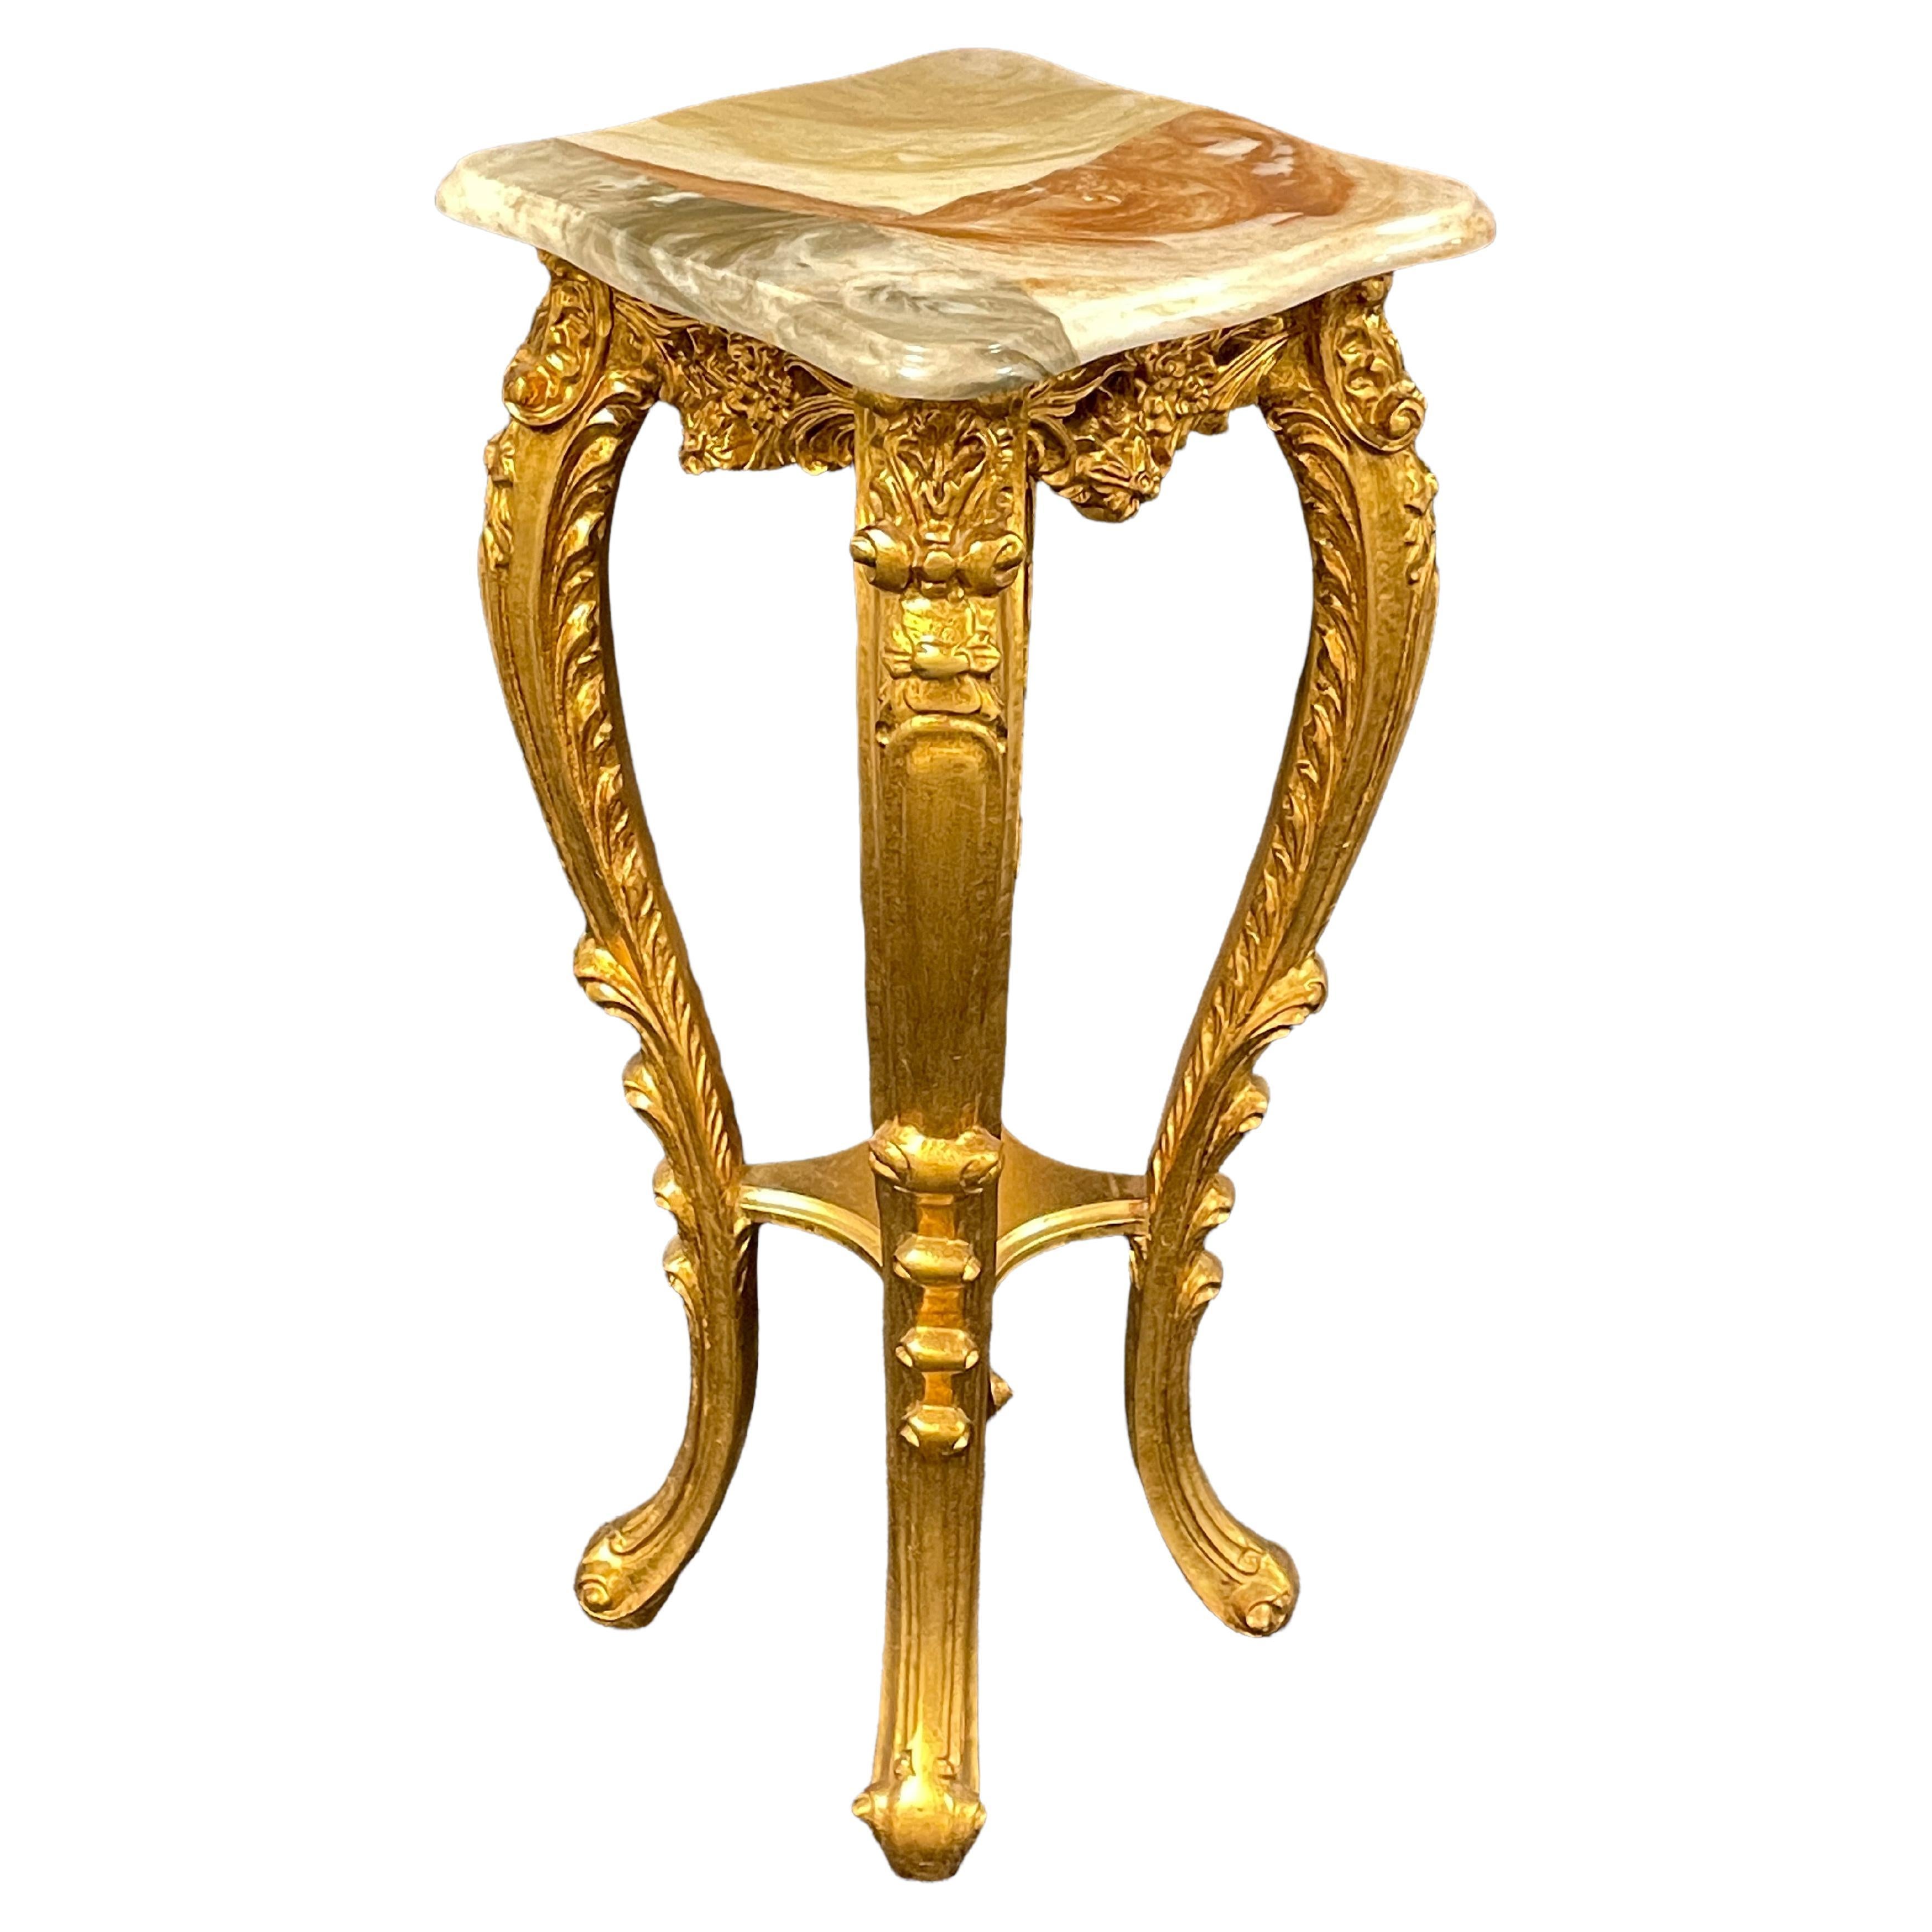 20th Century Carved Gilt Wood Toleware Console Pedestal Table, Italy For Sale